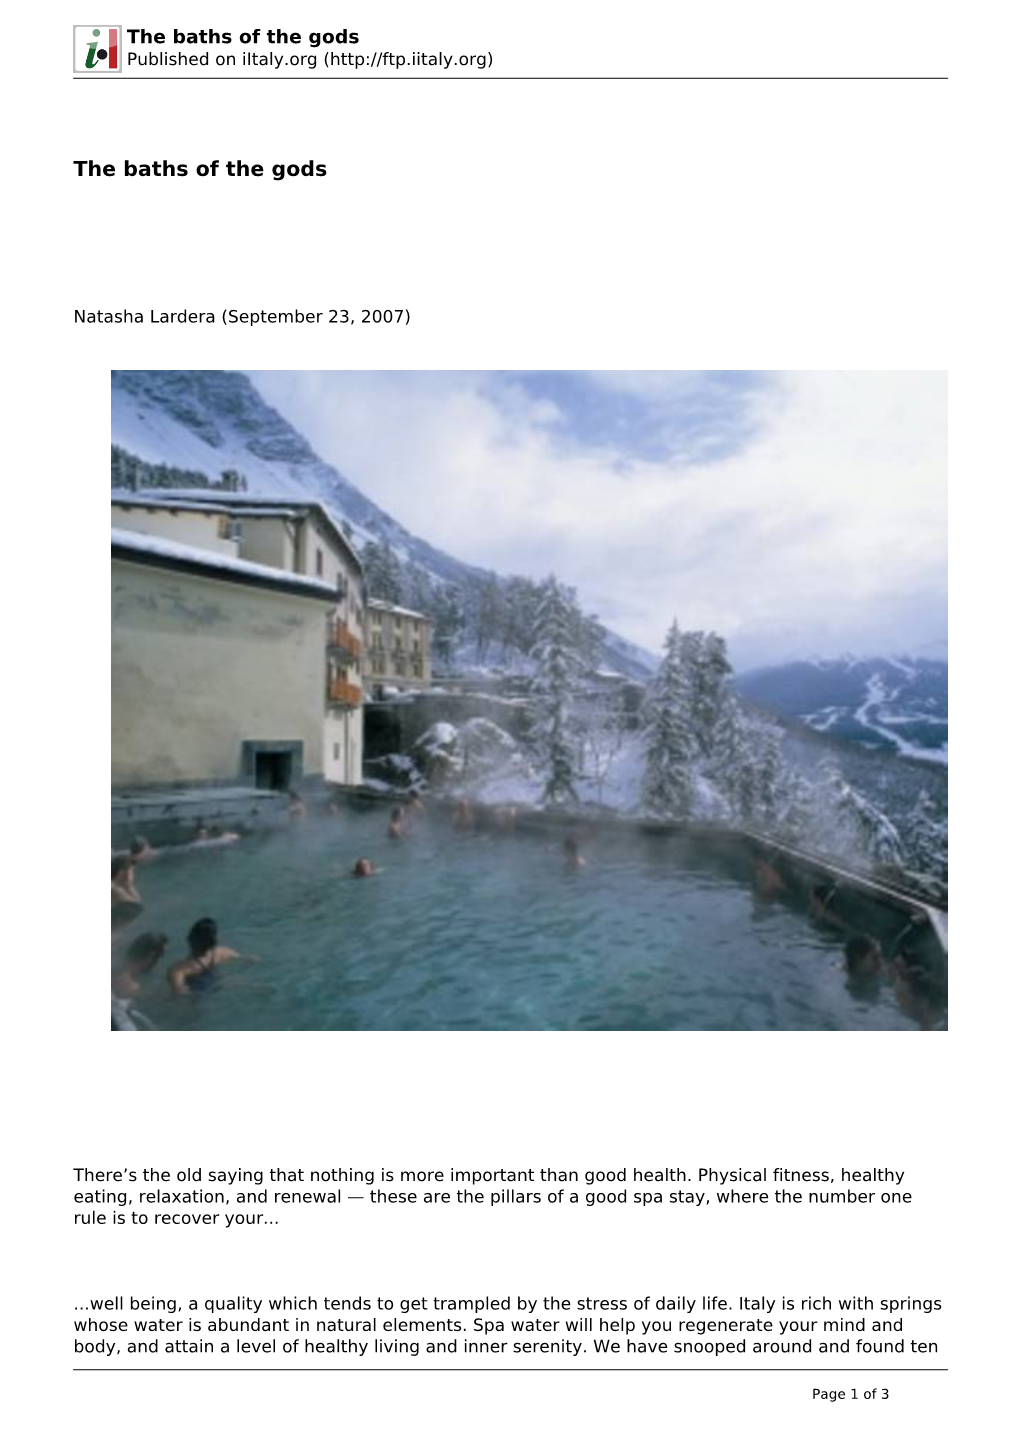 The Baths of the Gods Published on Iitaly.Org (